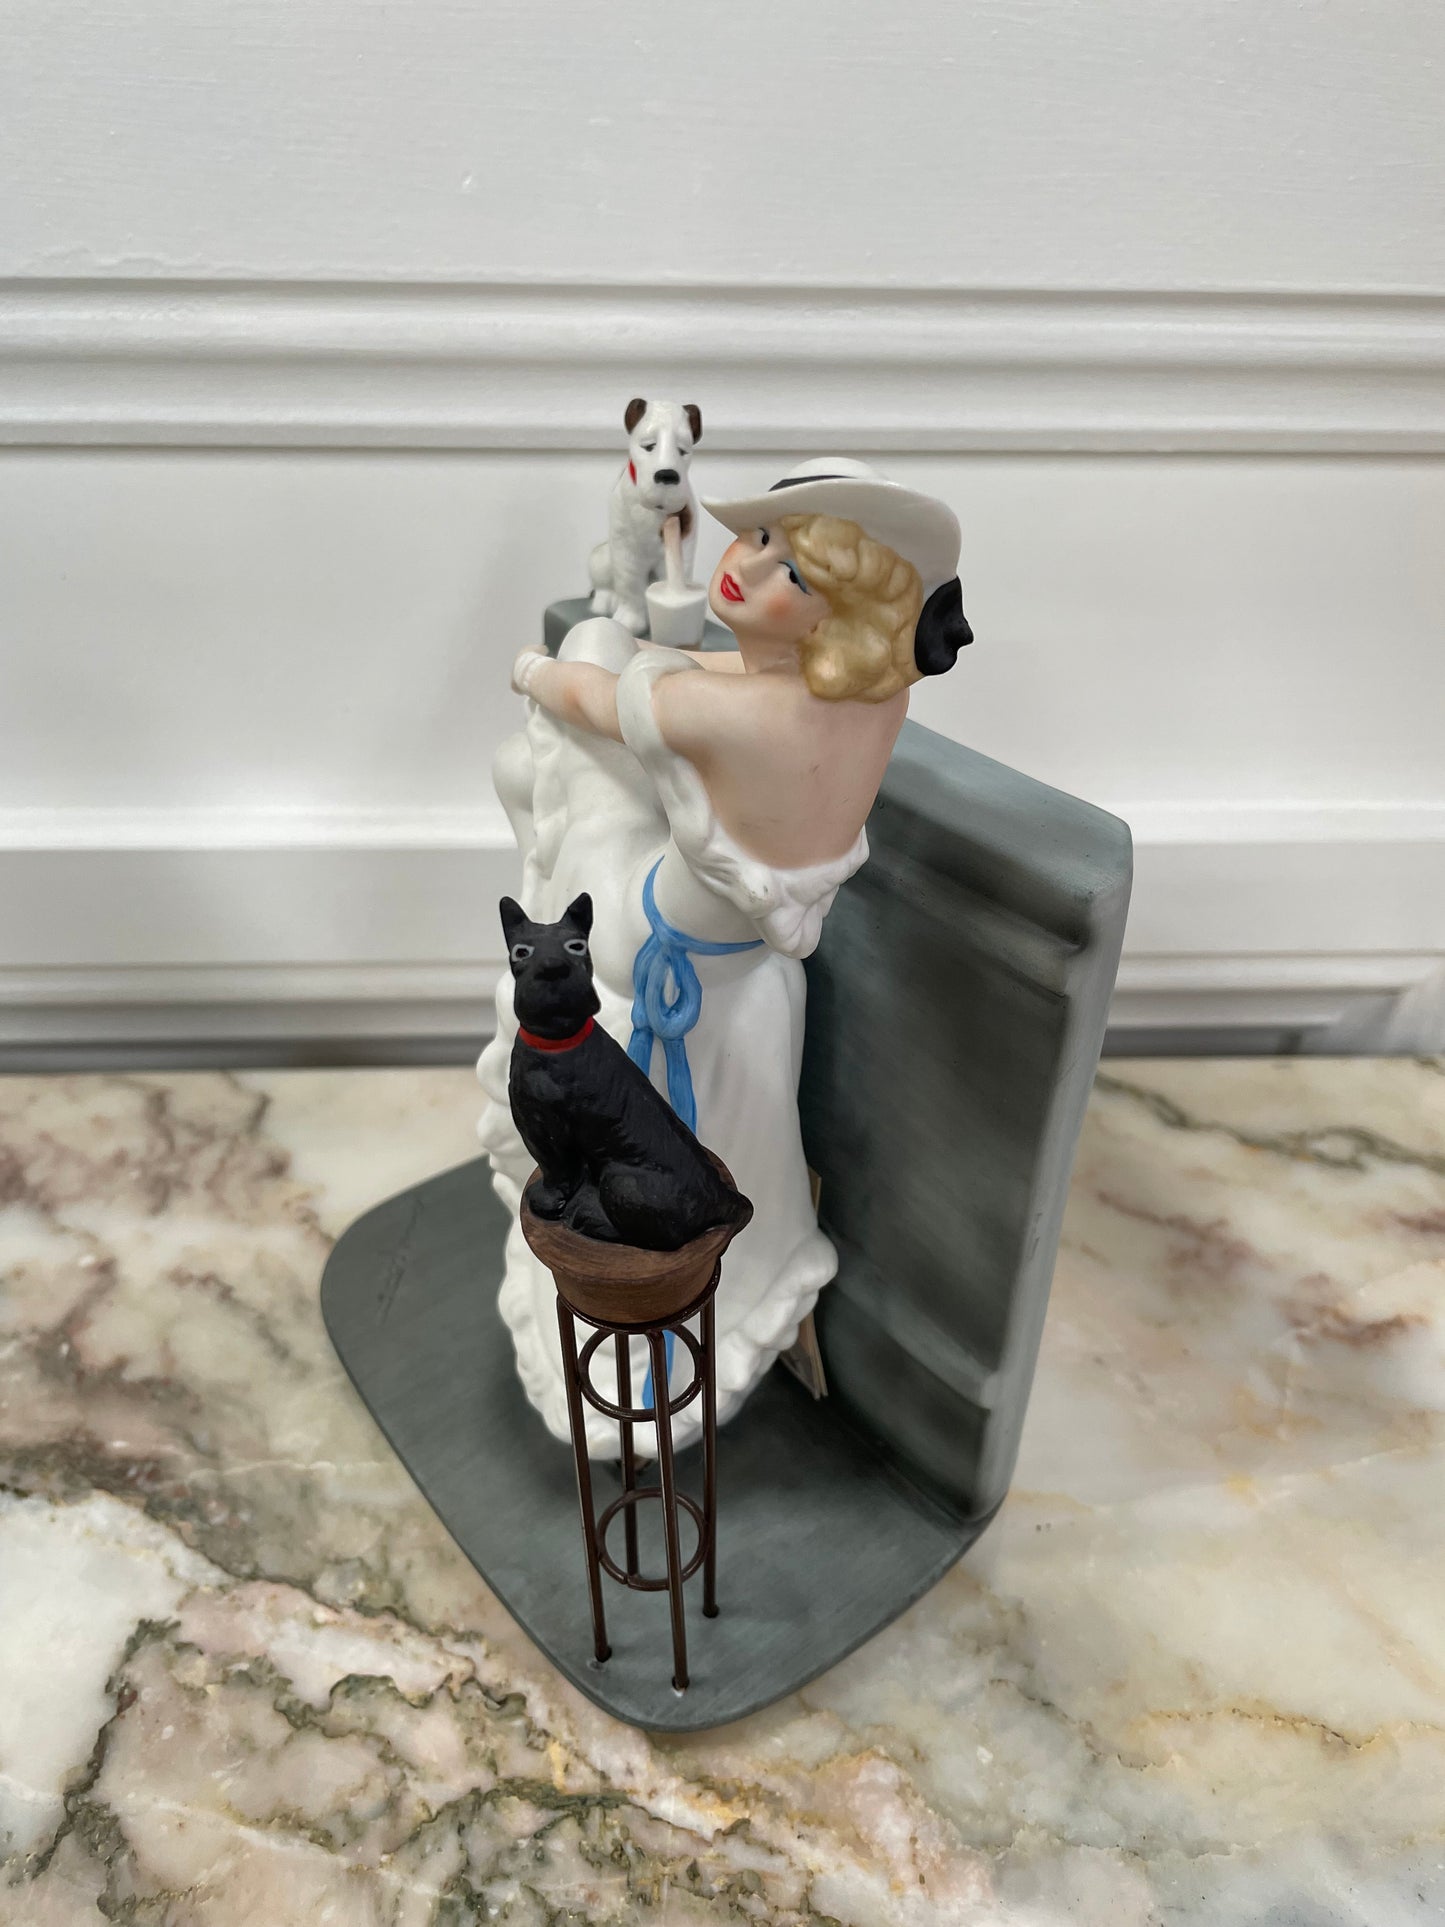 Louis ICART Figurine 1984 Limited Edition